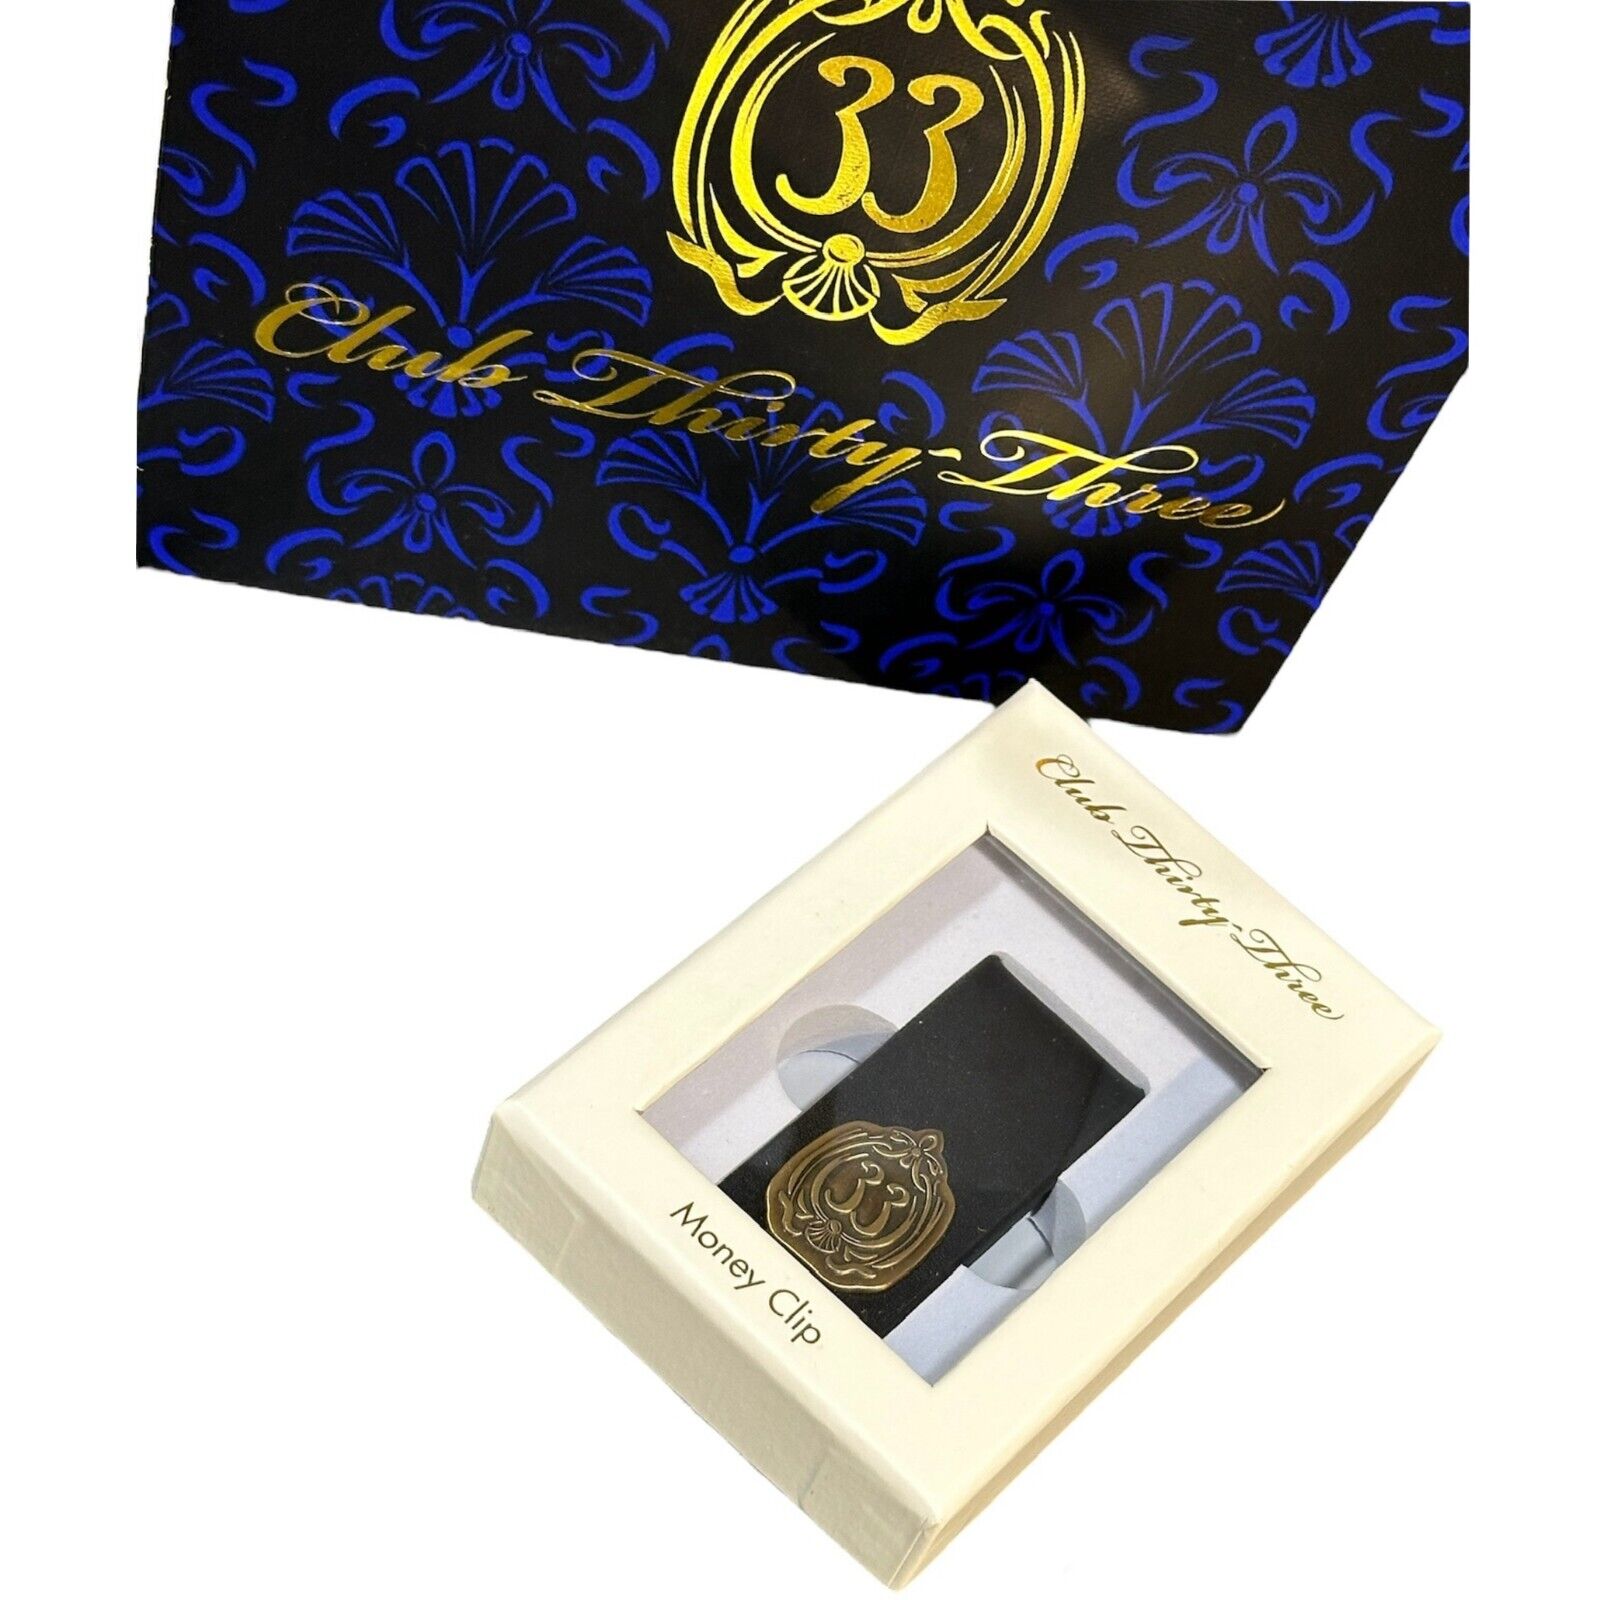 Wallet Money Clip Leather Card Holder Rare VIP Collectible Disneyland Club 33